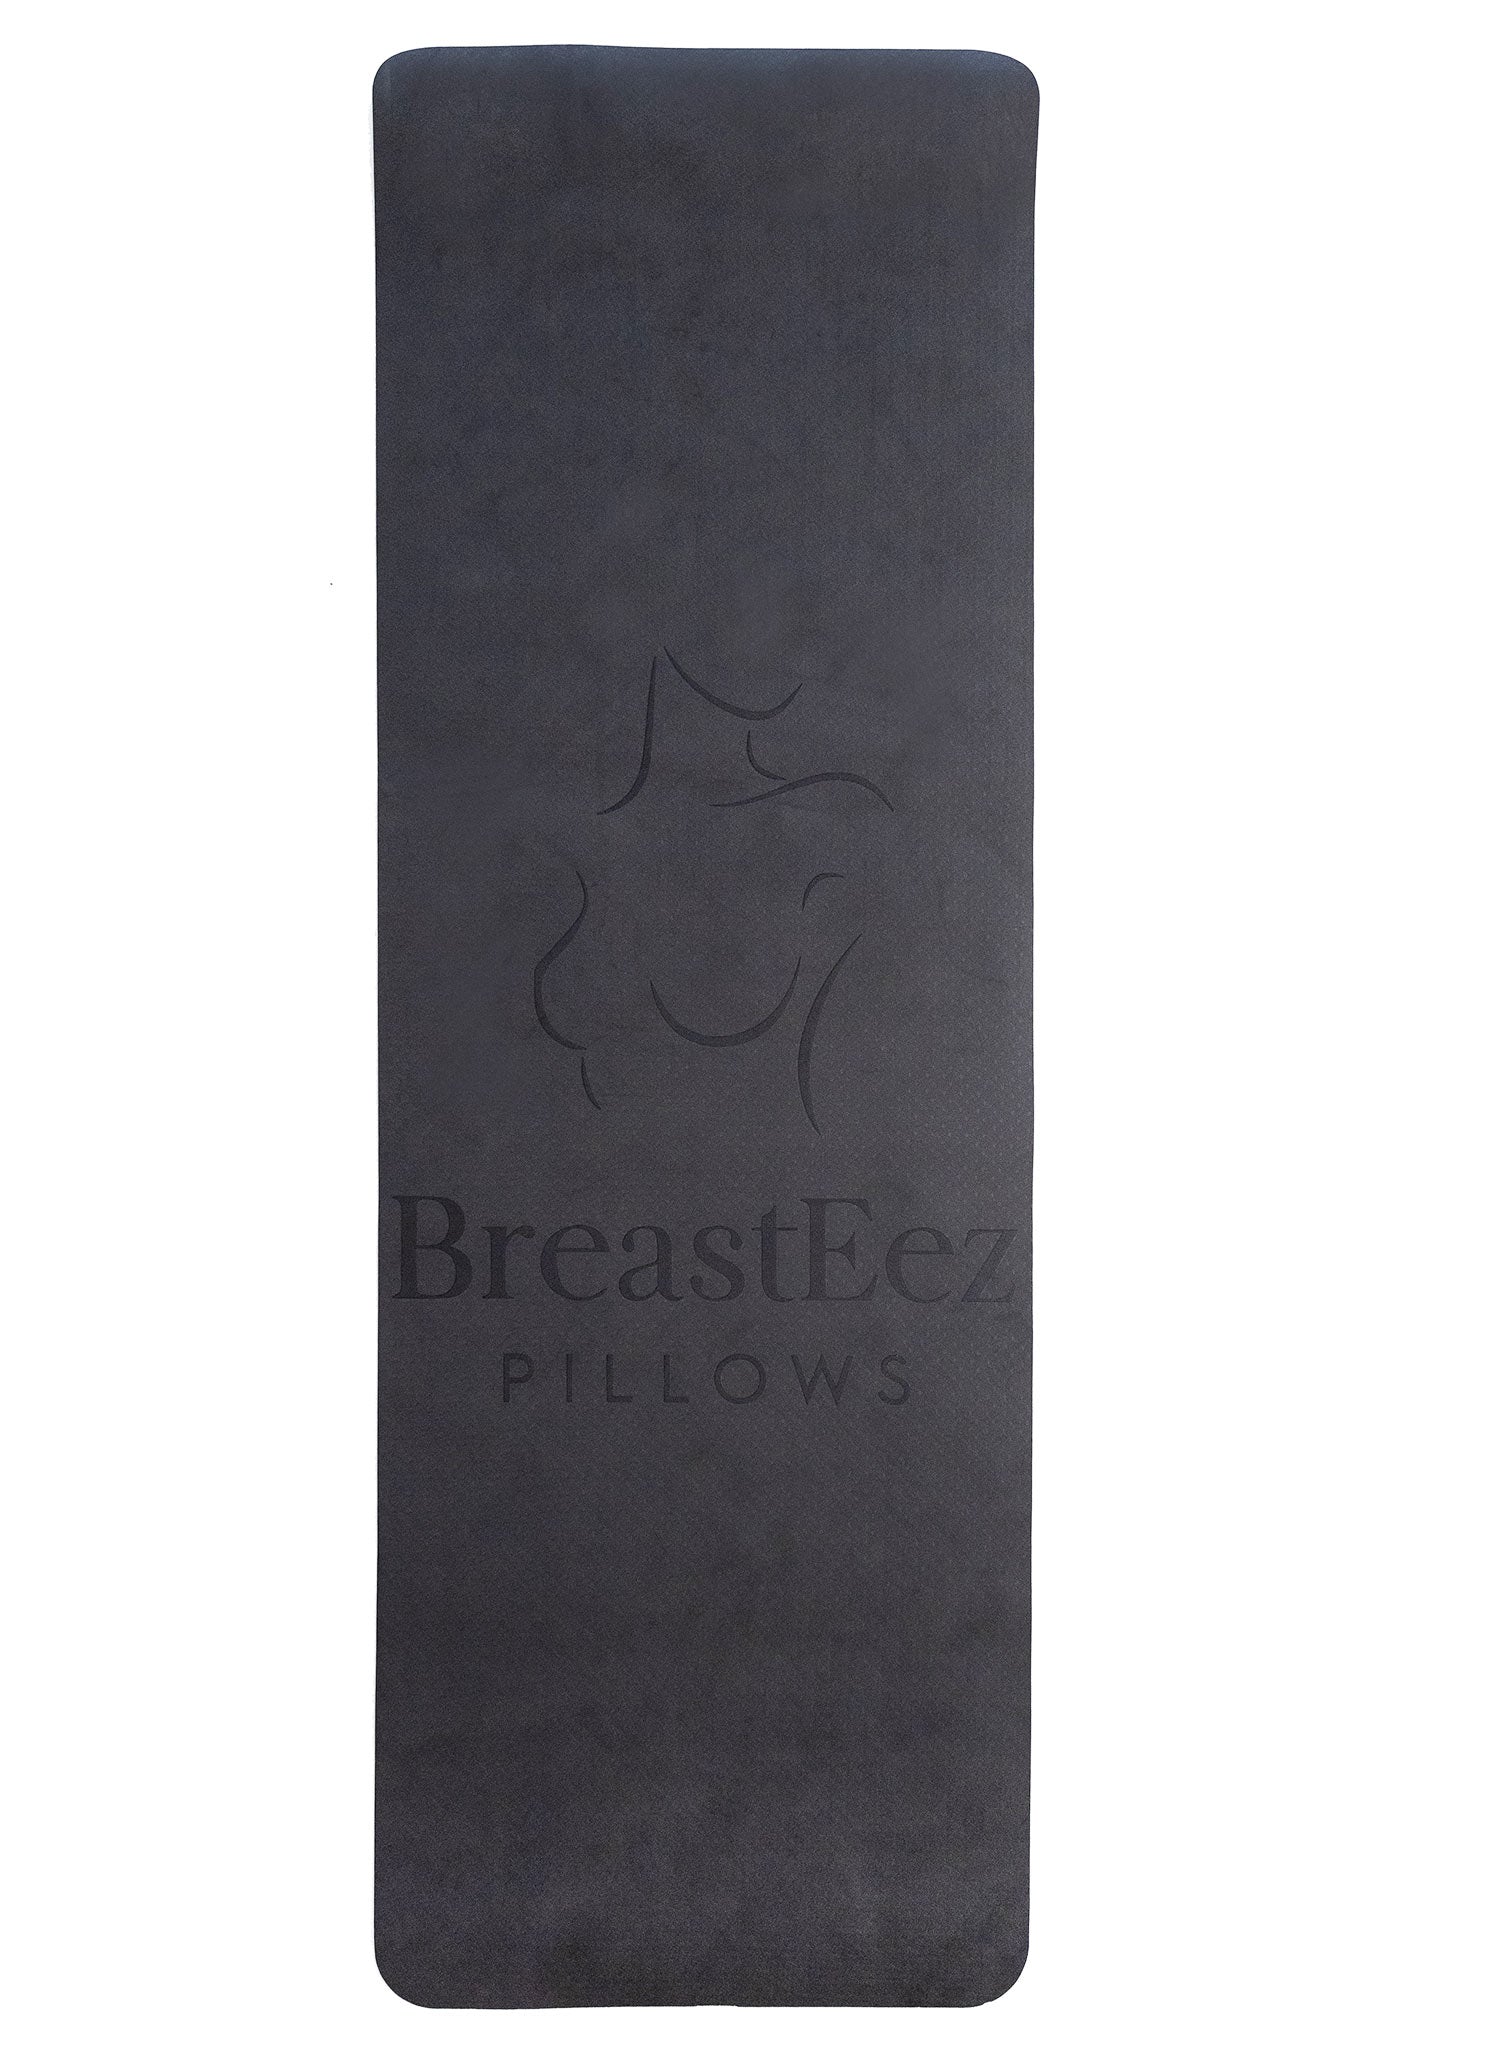 BreastEez yoga mat  highly durable and comfortable in black includes strap